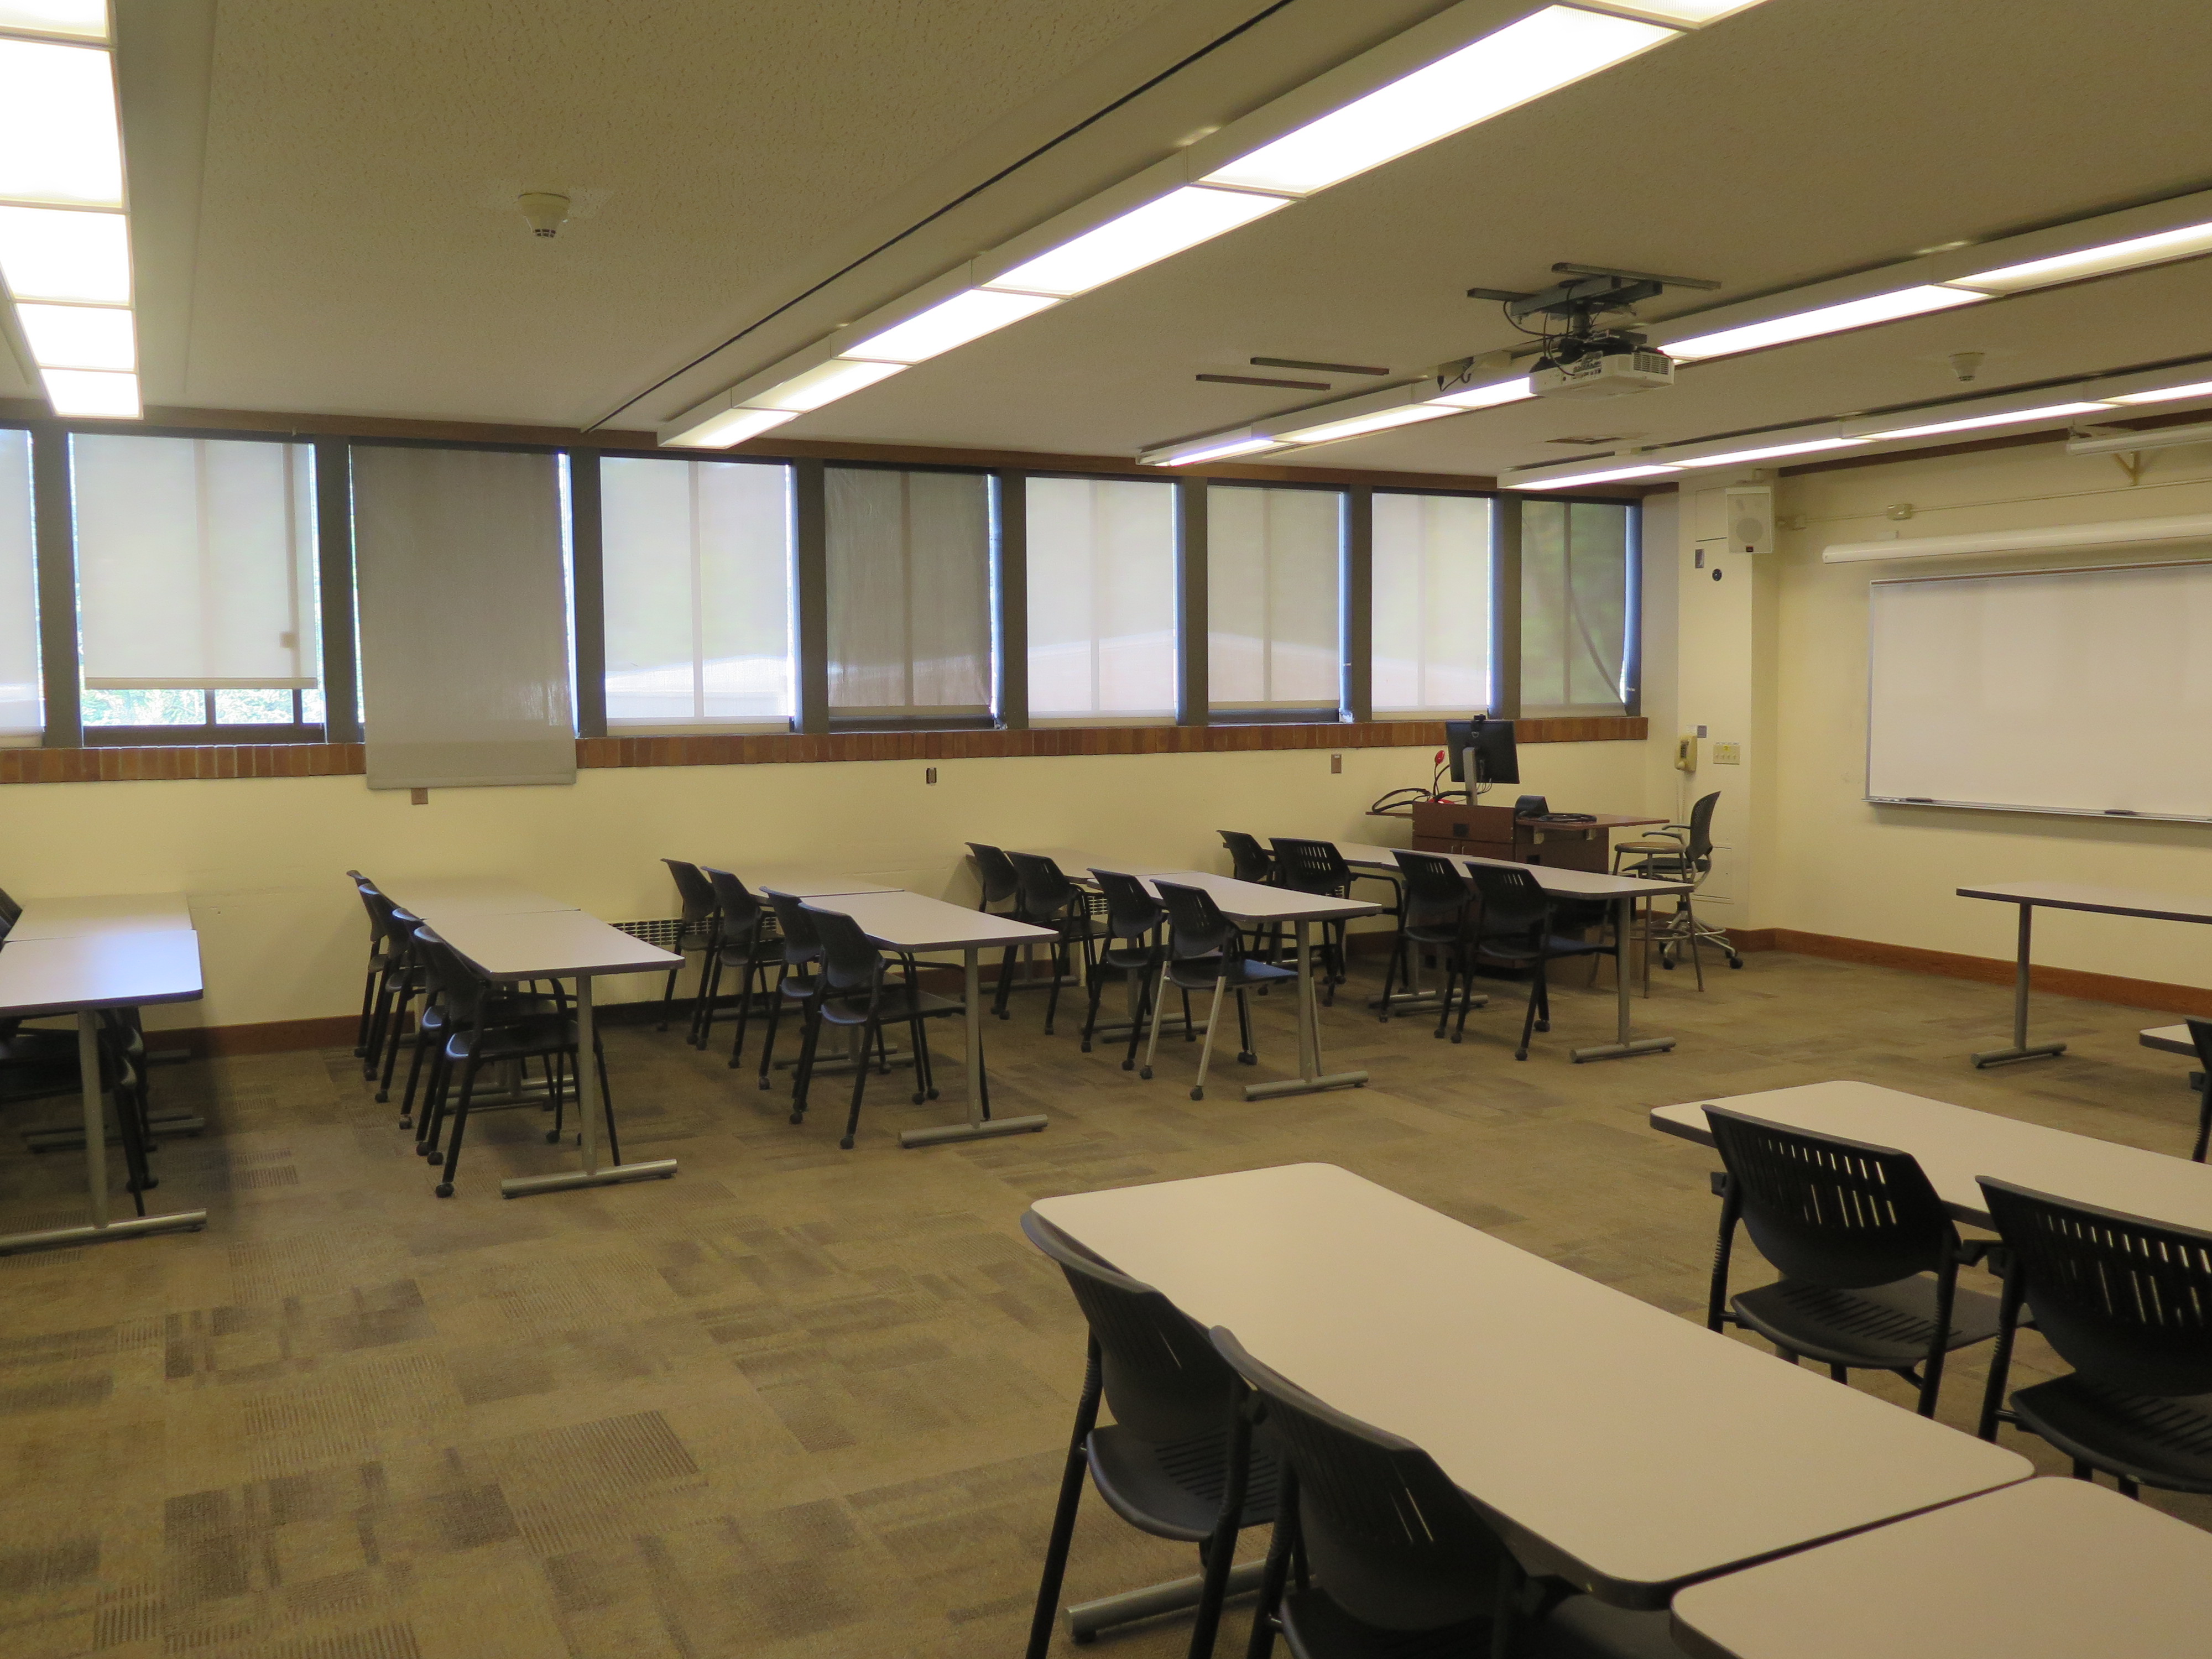 This room contains carpet floor, moveable tables and chairs, a whiteboard at the front of the room and a podium.